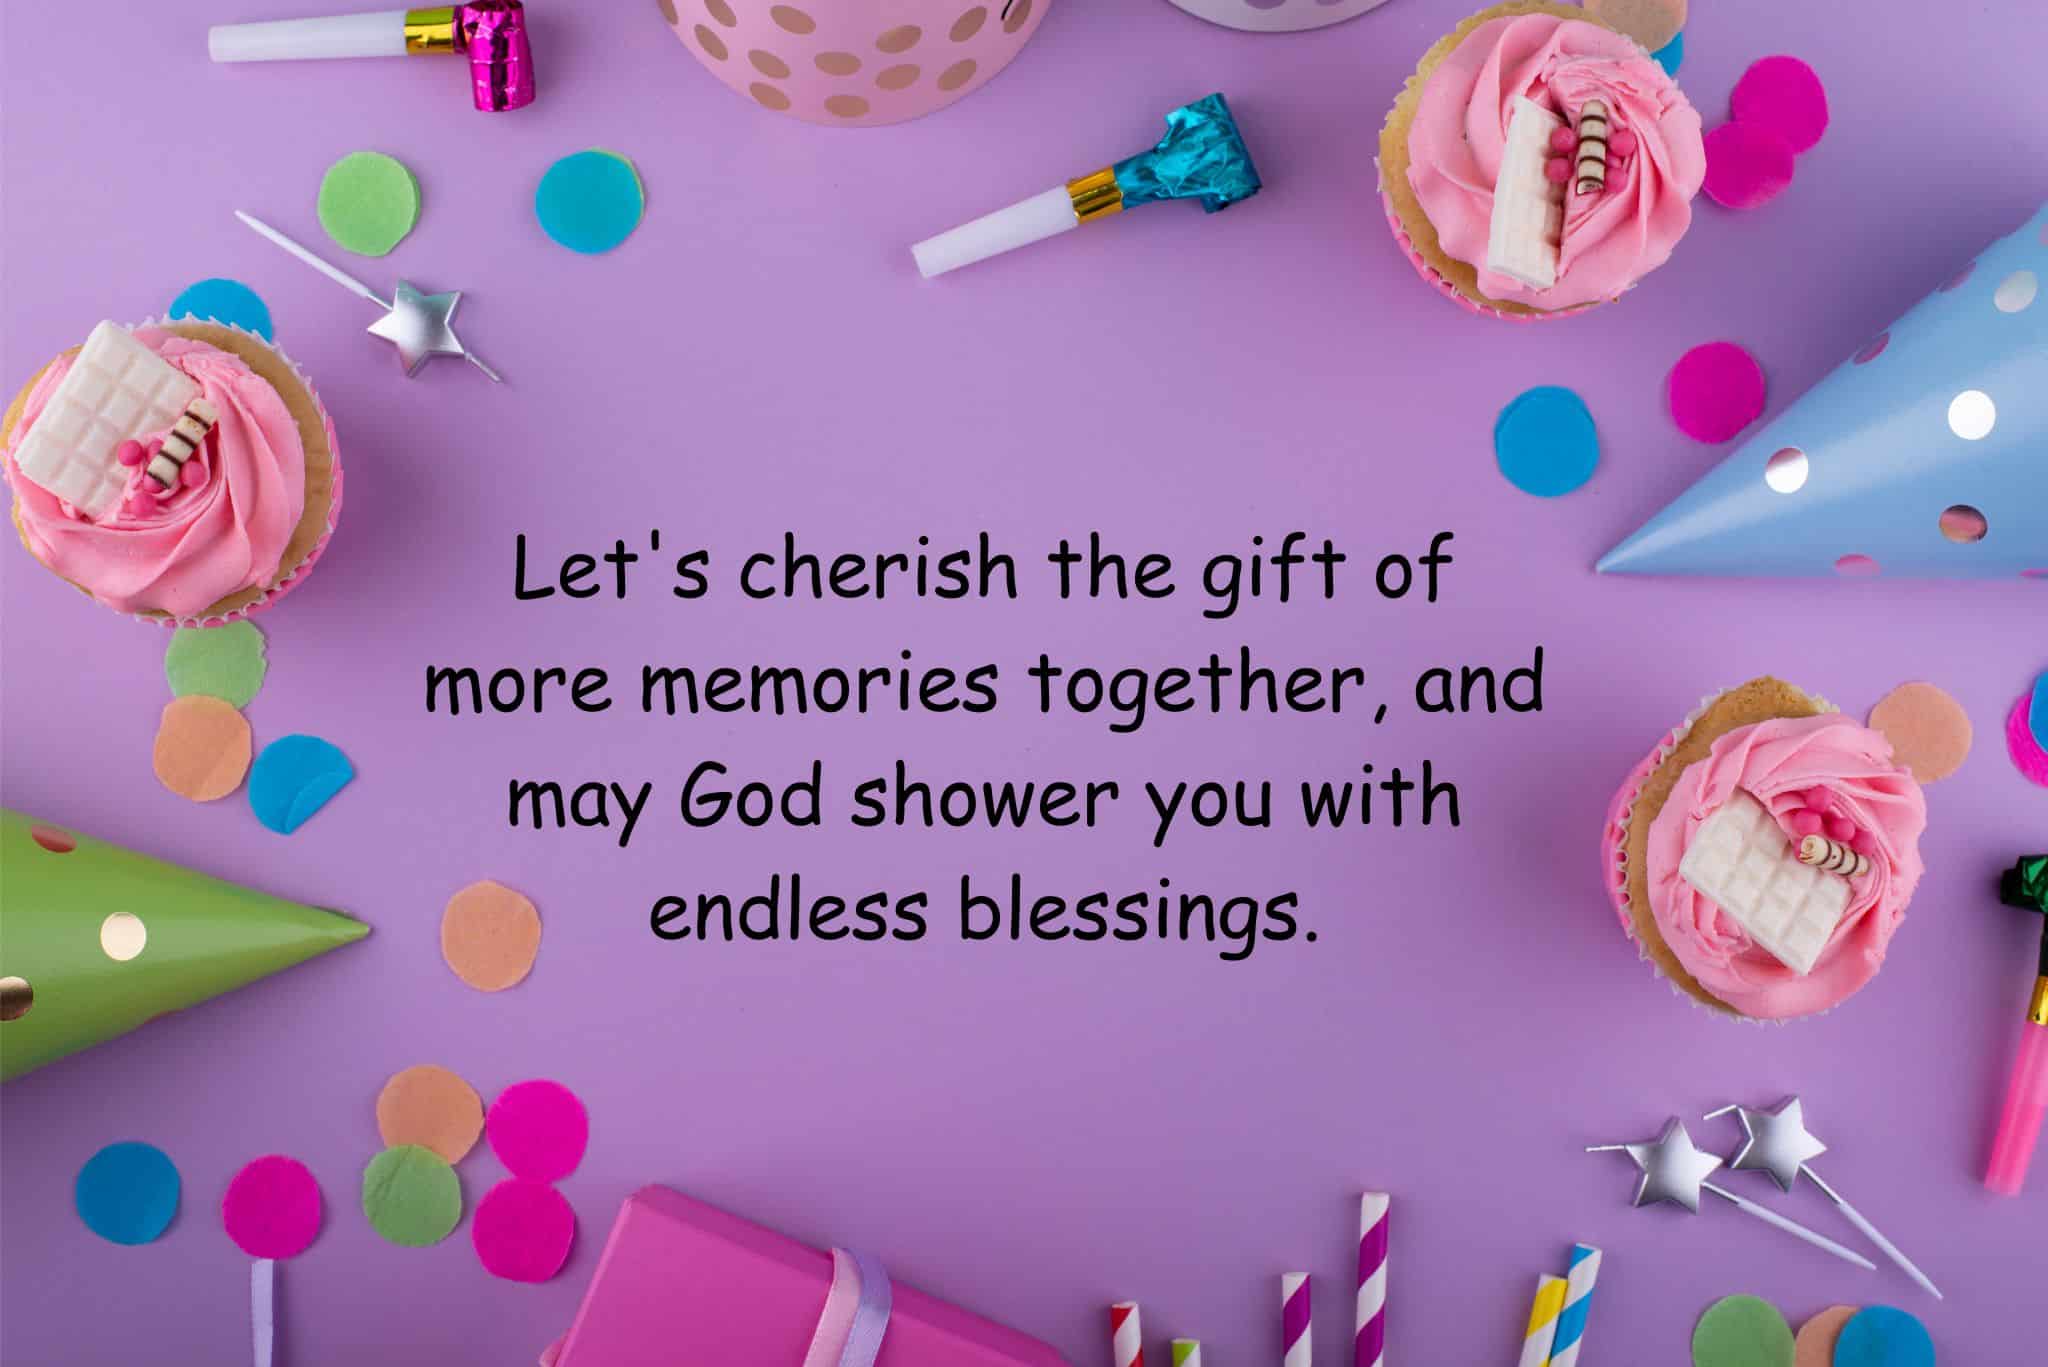 let's cherish the gift of more memories together, and may god shower you with endless blessings.